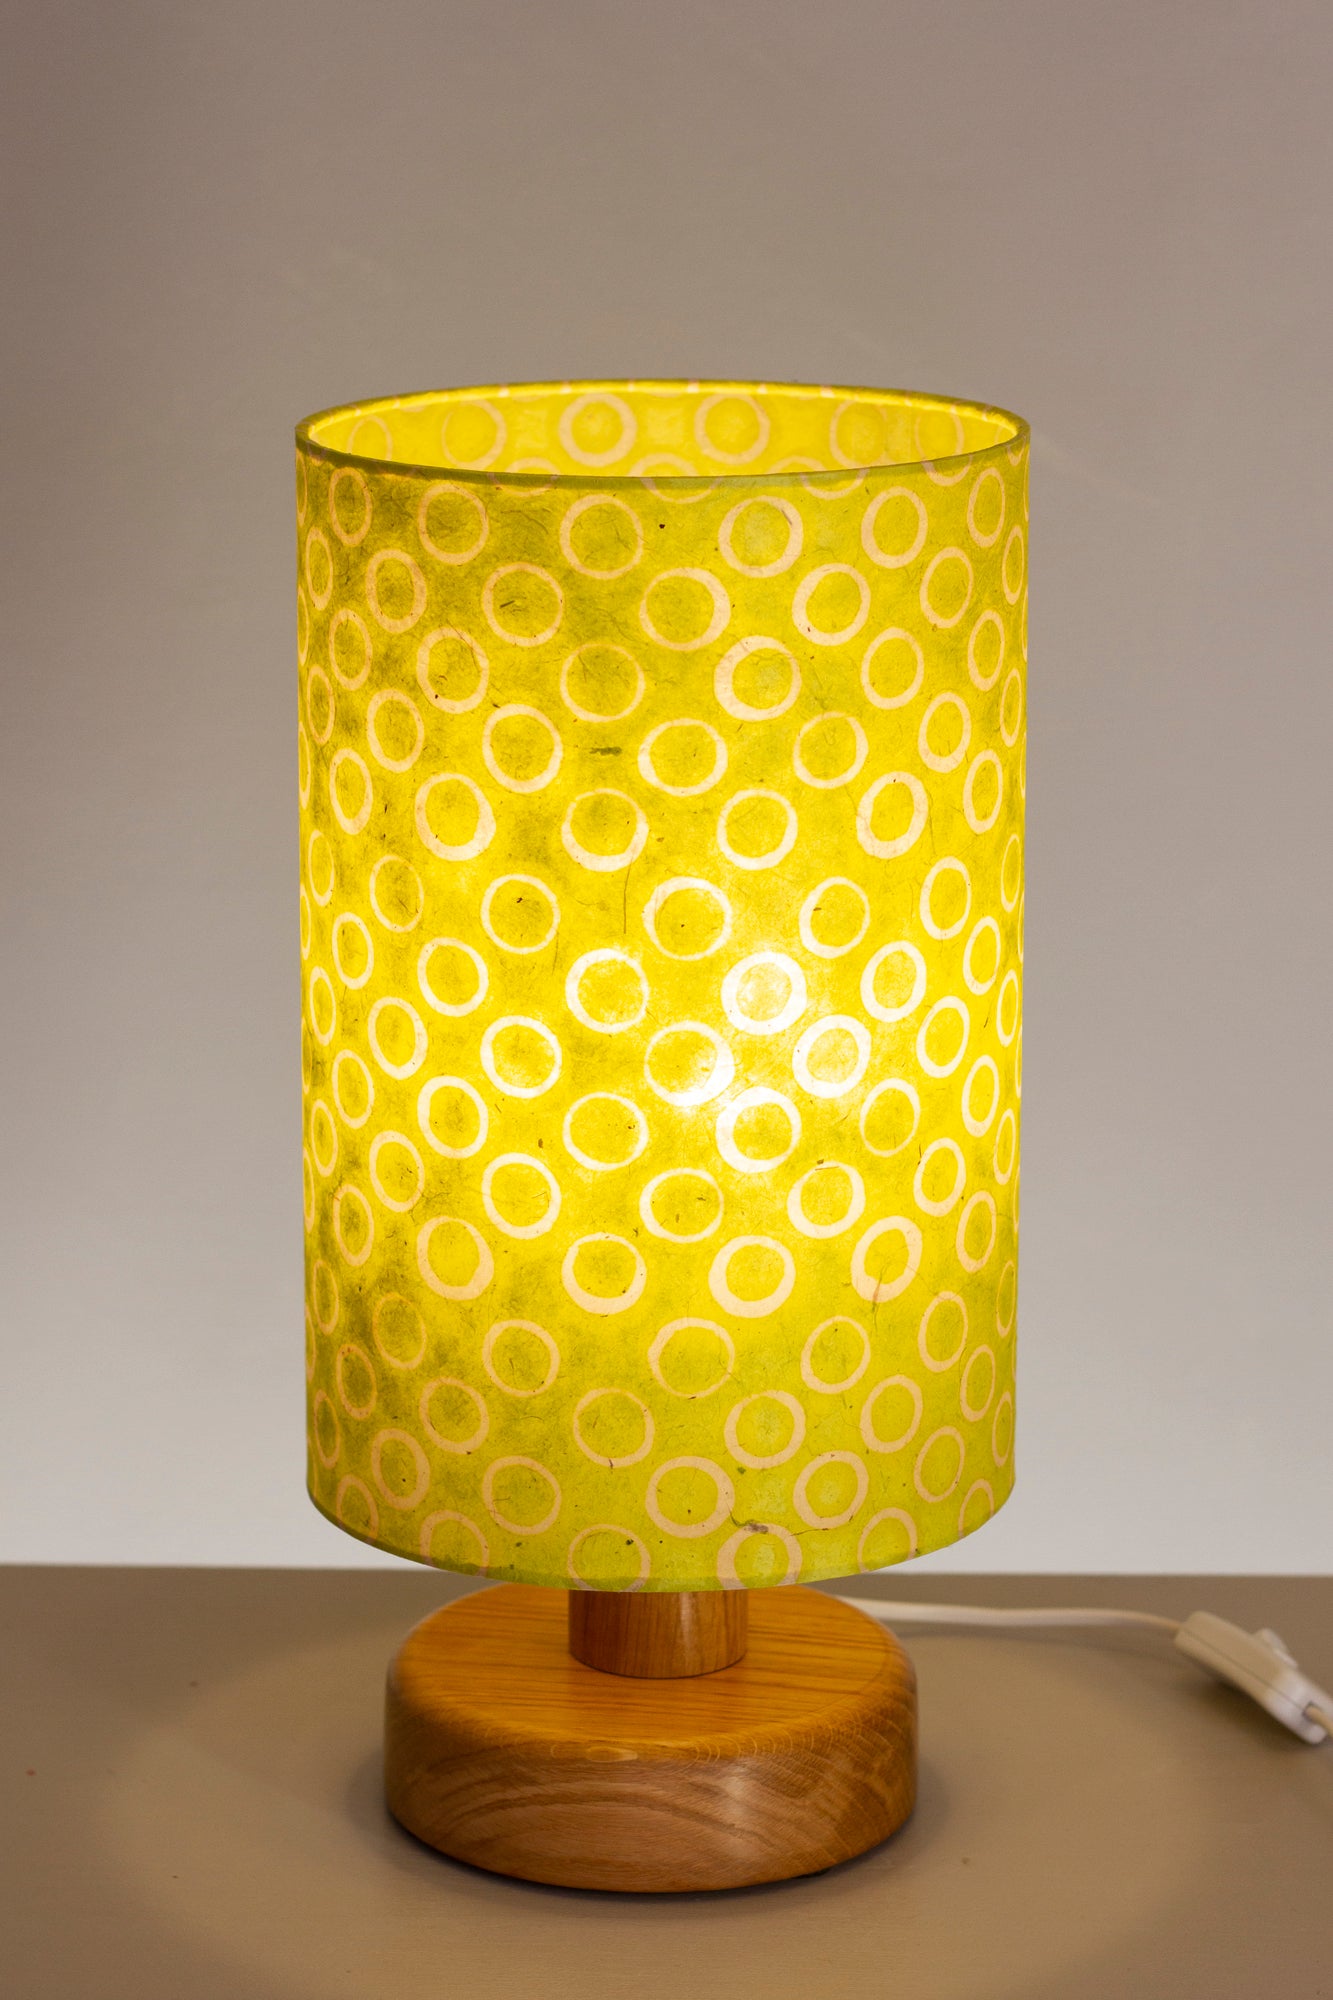 Round Oak Table Lamp with 20cm x 30cm Lamp Shade in P02 ~ Batik Lime Circles